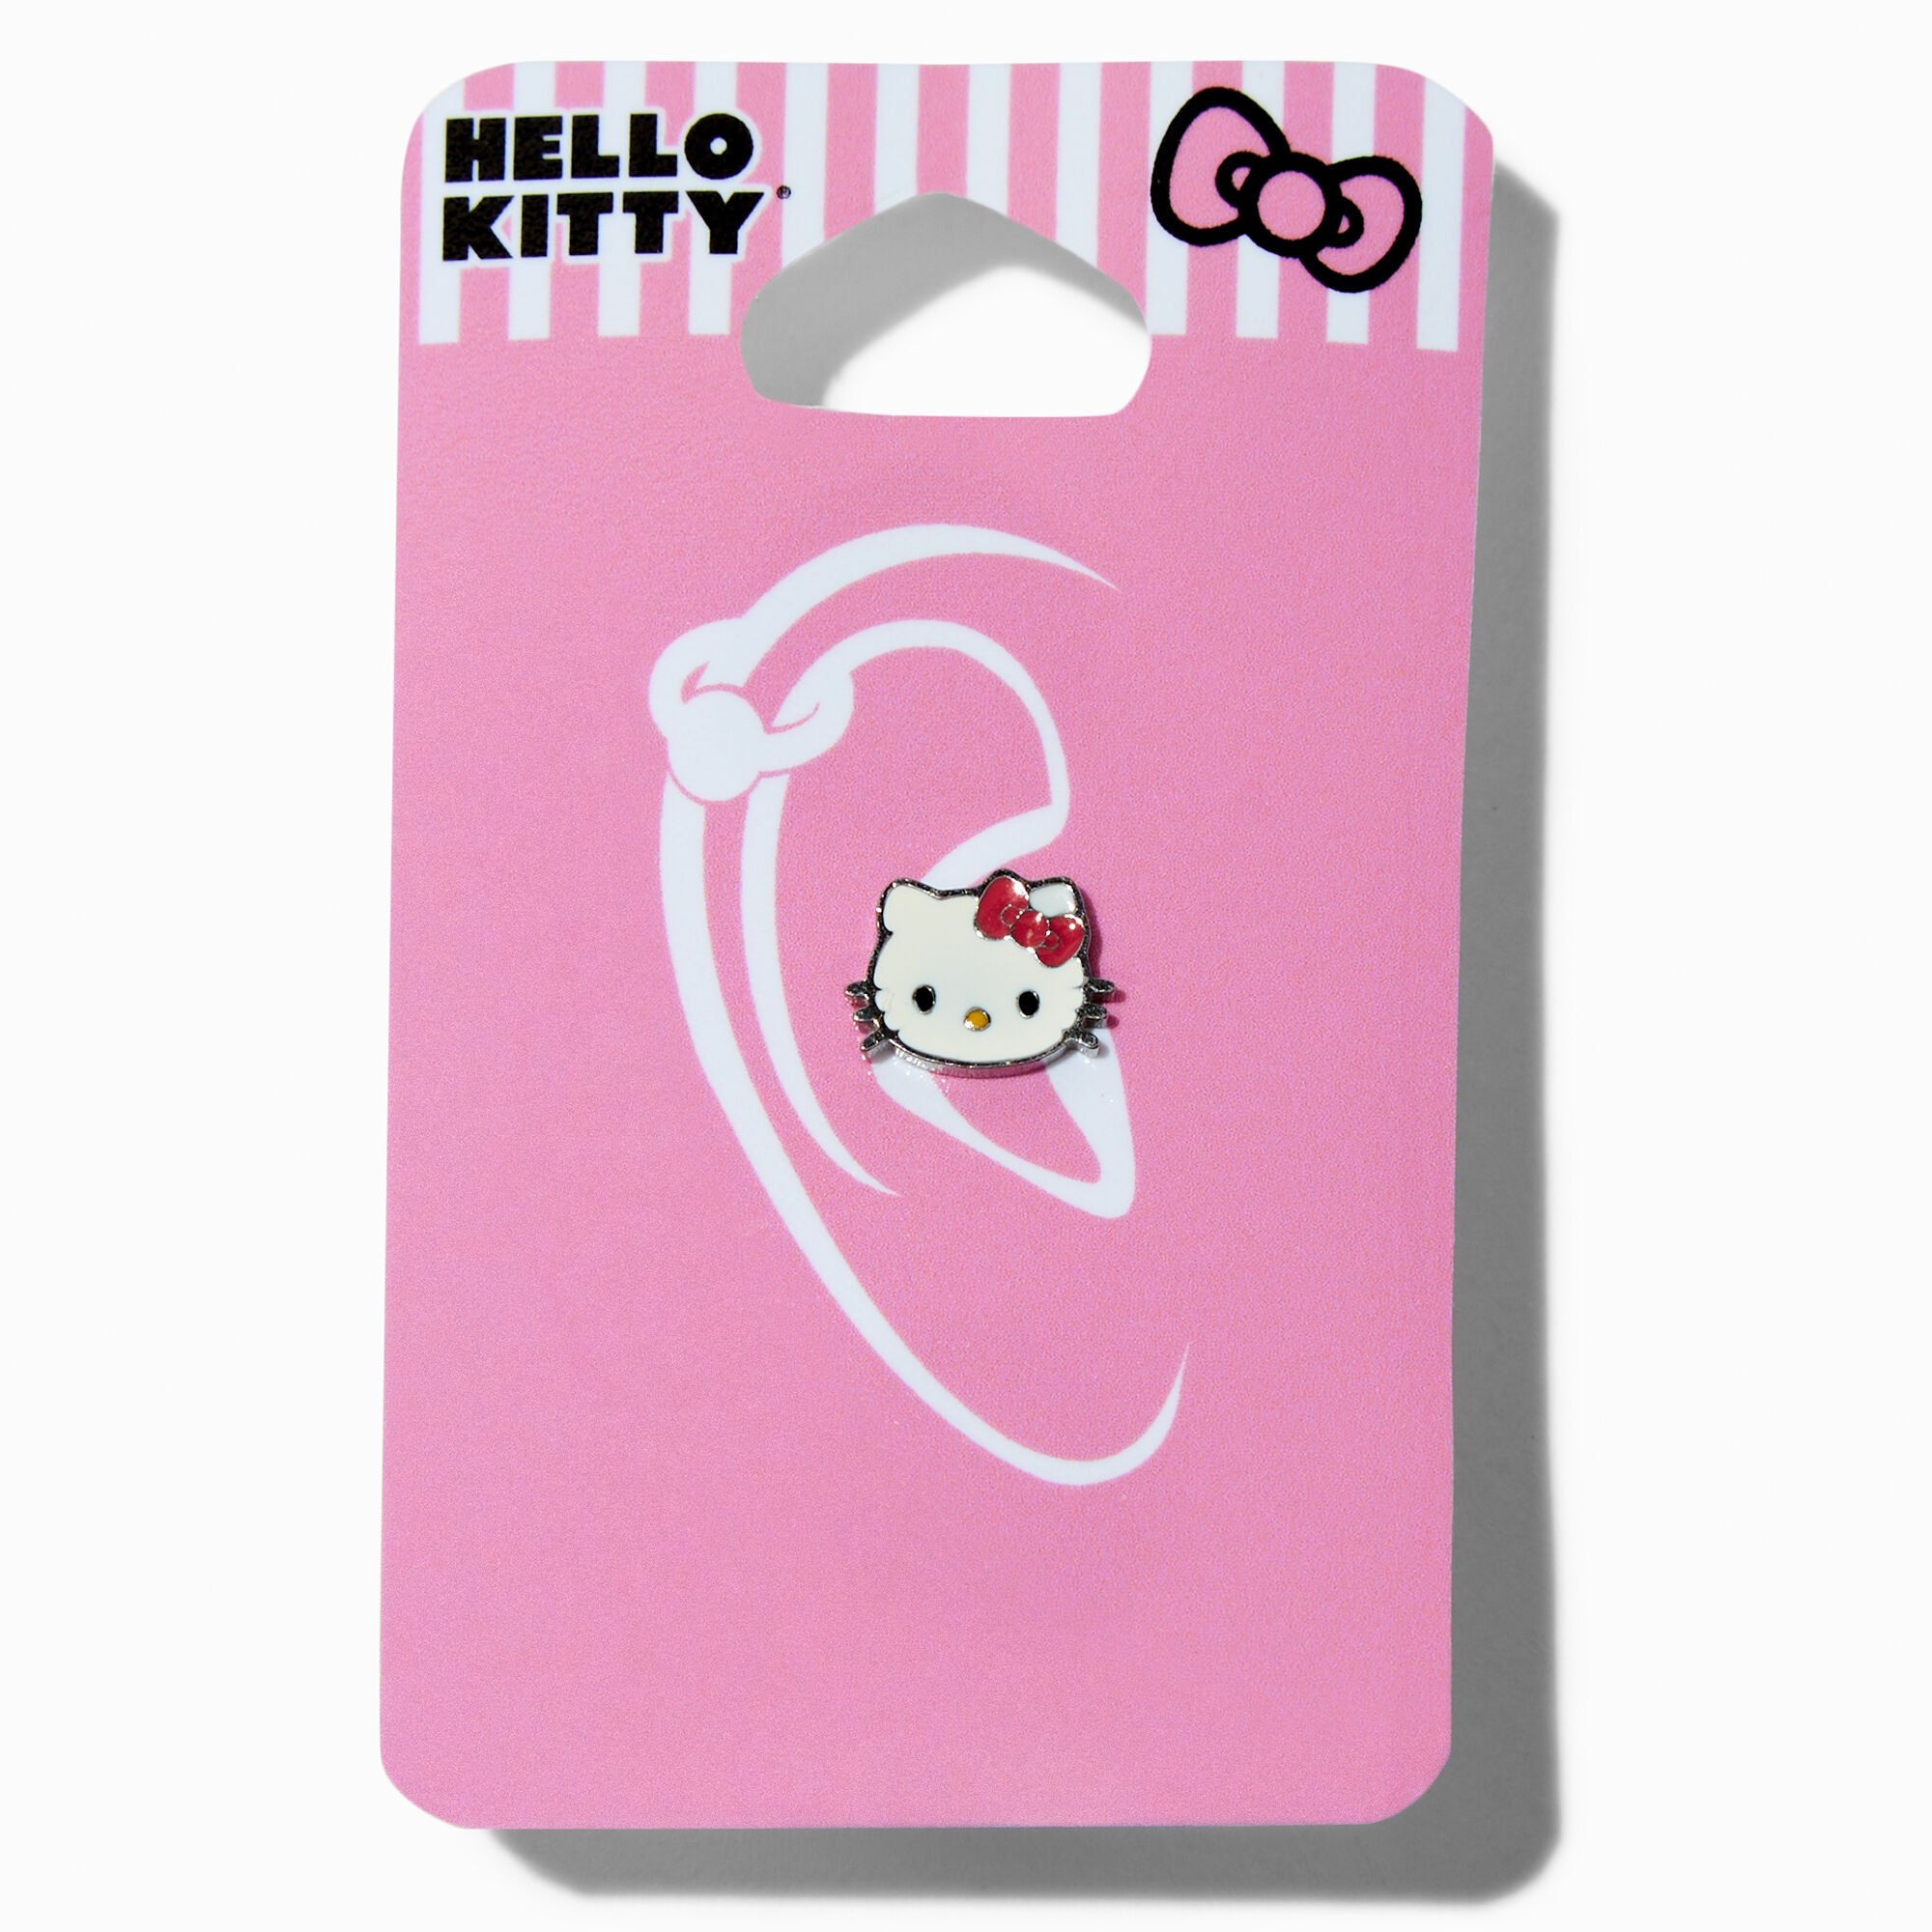 View Claires Hello Kitty Stainless Steel Face 16G Cartilage Earring Silver information